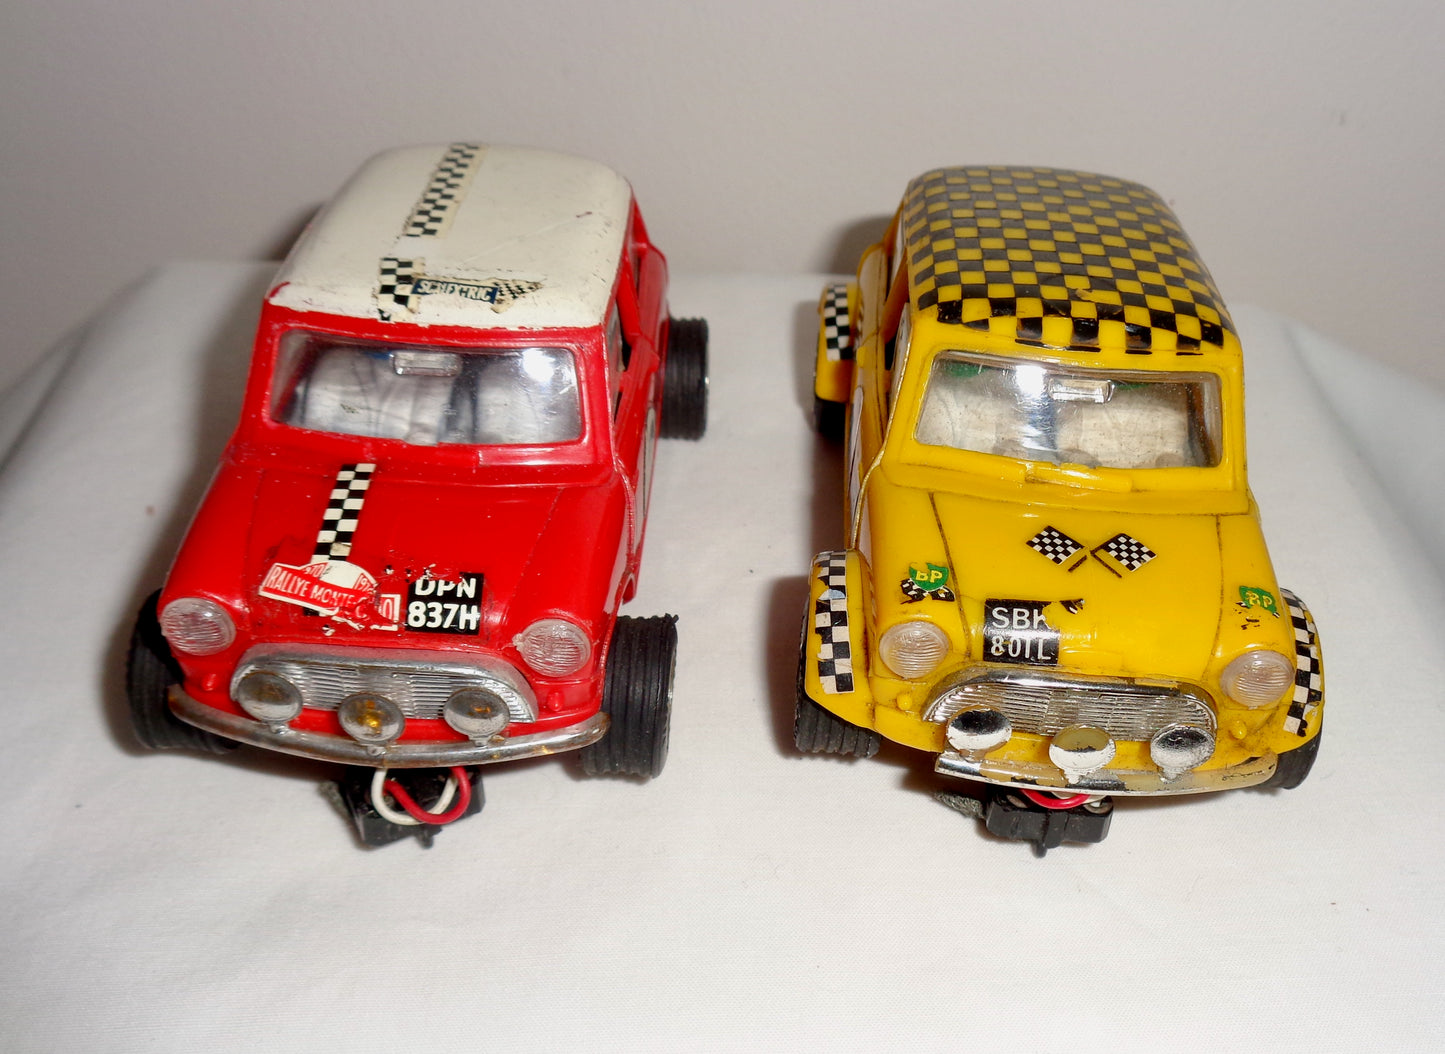 Pair of Scalextric C7 Rally Mini Coopers: Red With White Roof and Yellow With Black Chequered Roof